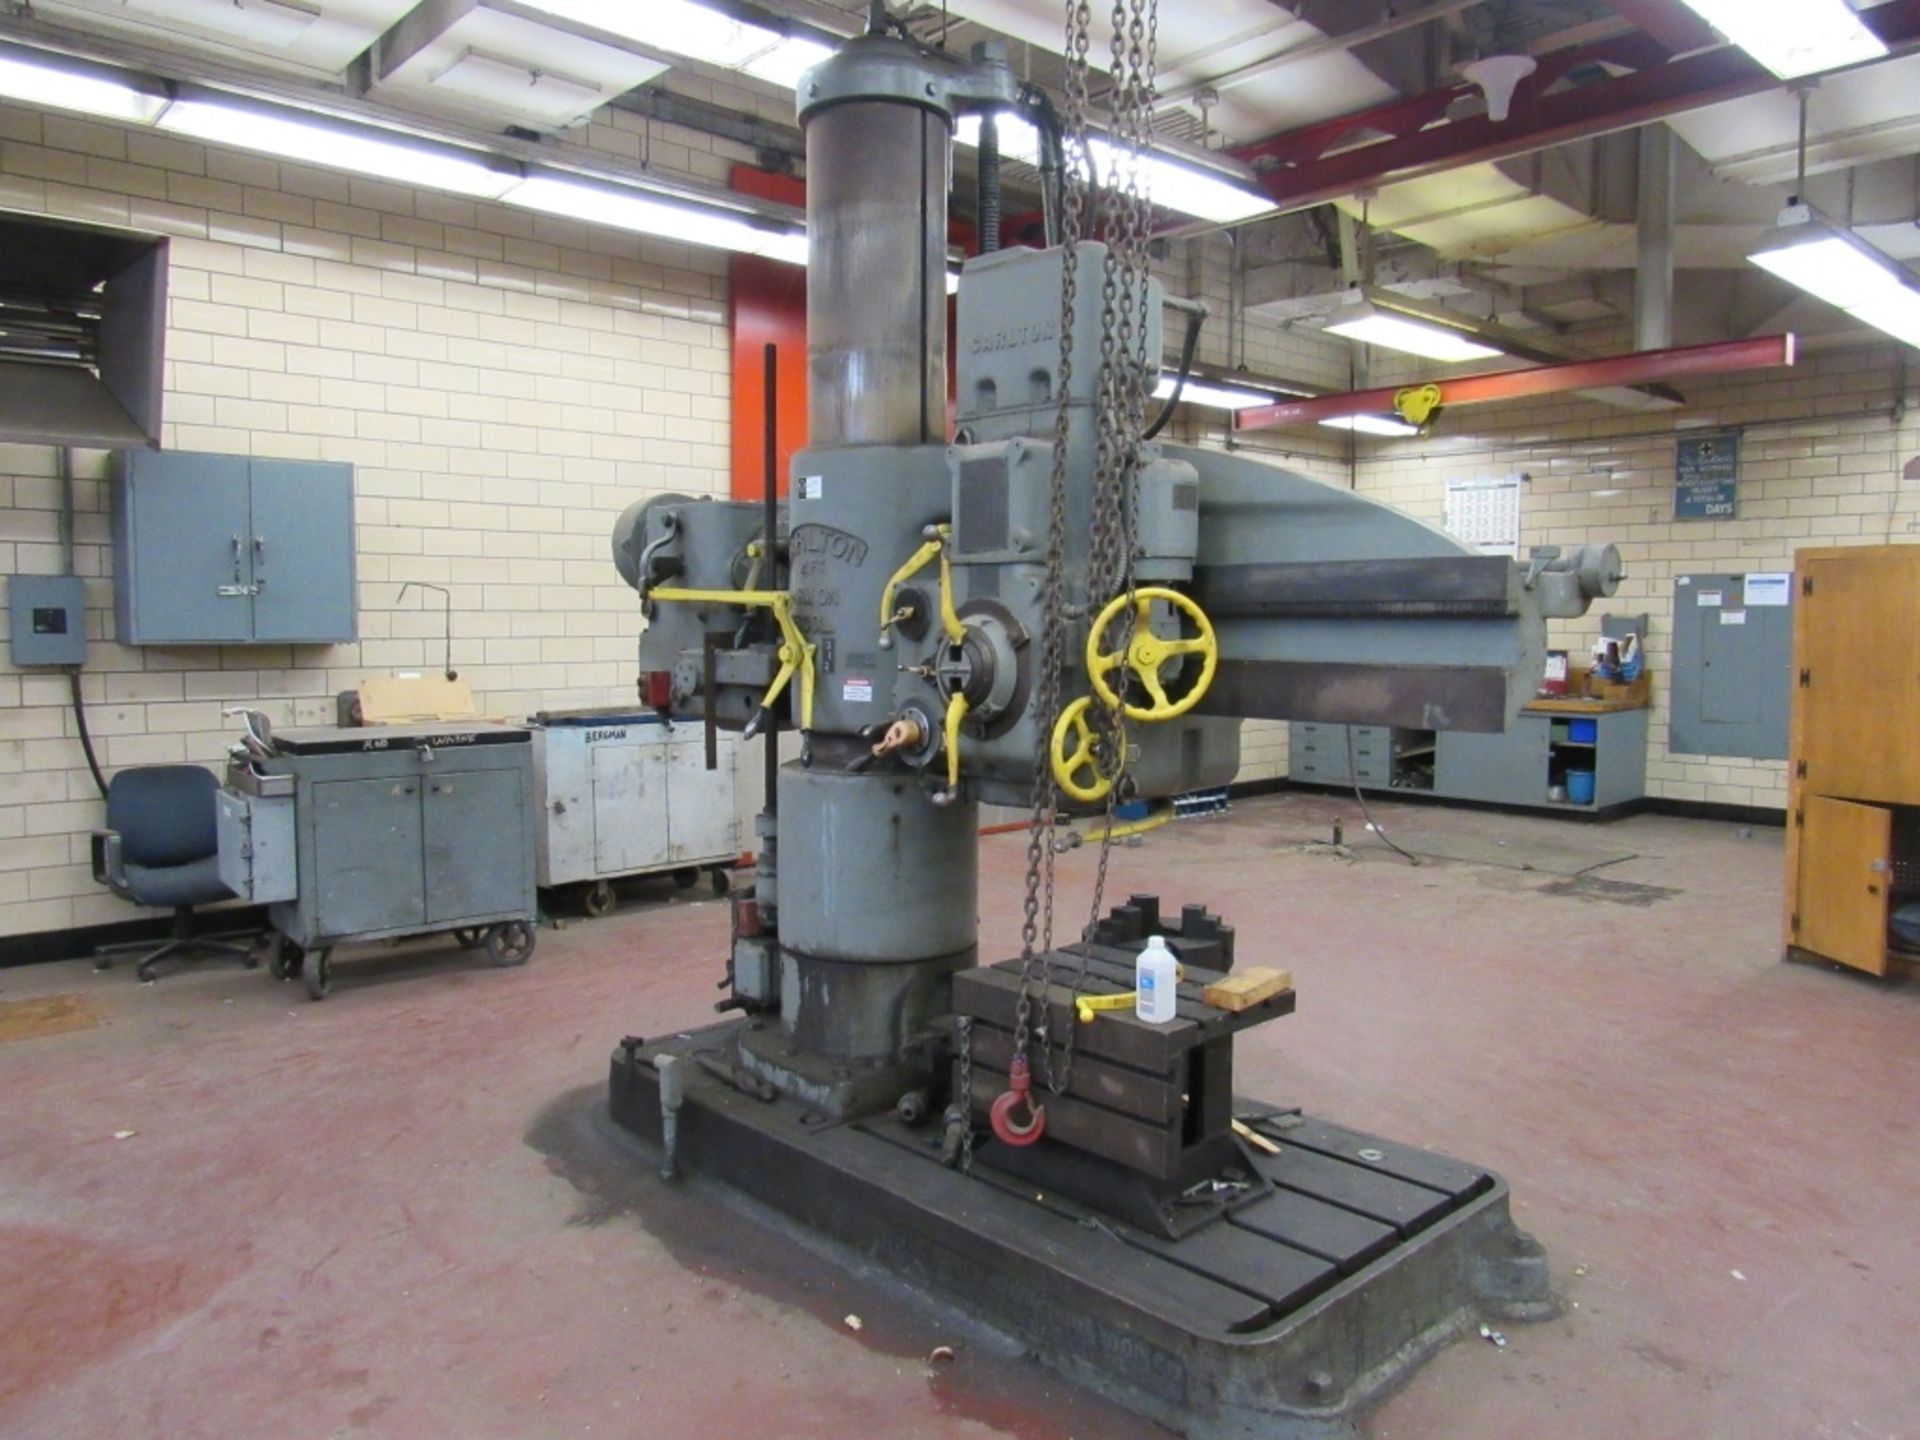 Carlton Radial Arm Drill- Model - Unmarked Serial - Unmarked Rigging Fee - $750.00 4' Arm 15" Col